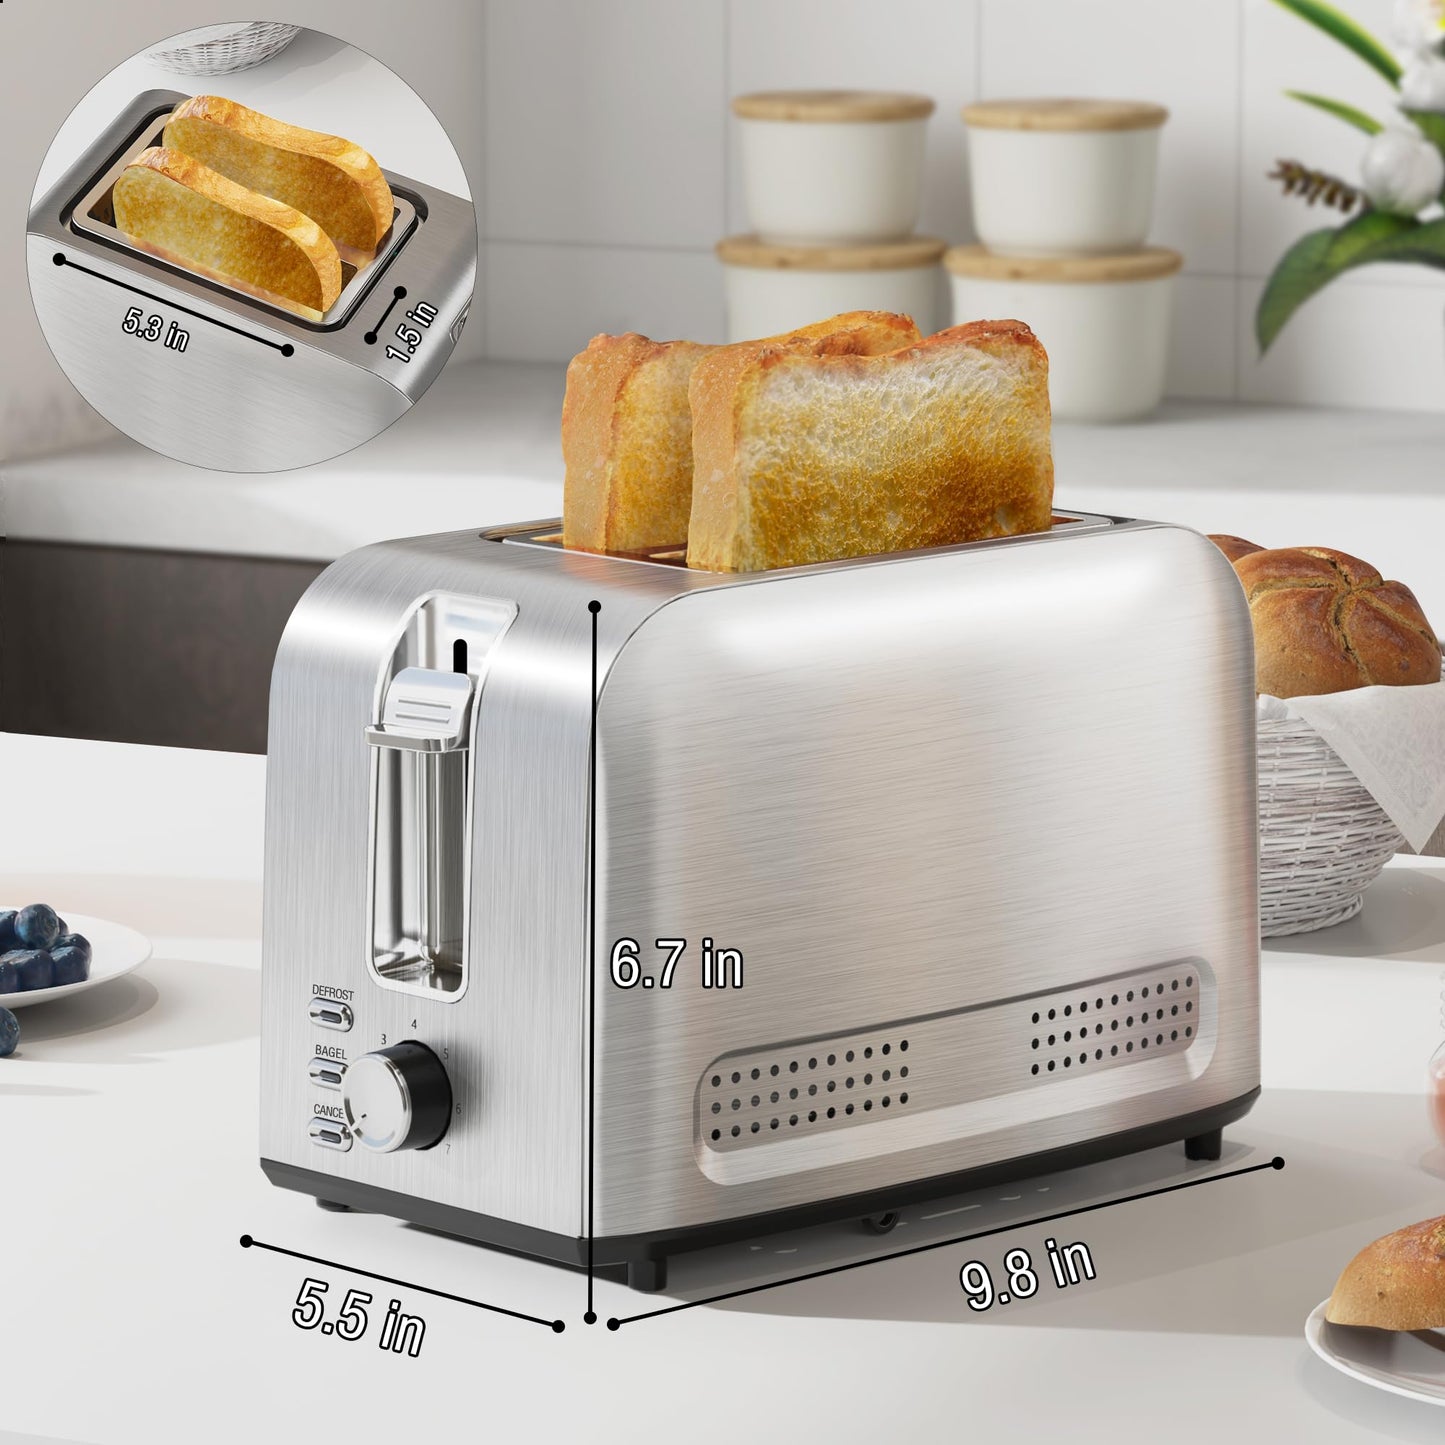 Runnatal 2 Slice Toaster, 100% Stainless Steel, Wide Slot Toaster Multifunctional with 7 Toast Settings, Defrost, BAGEL, Cancel Functions, Easy to Operate and Clean 120V 800W Silver Metallic